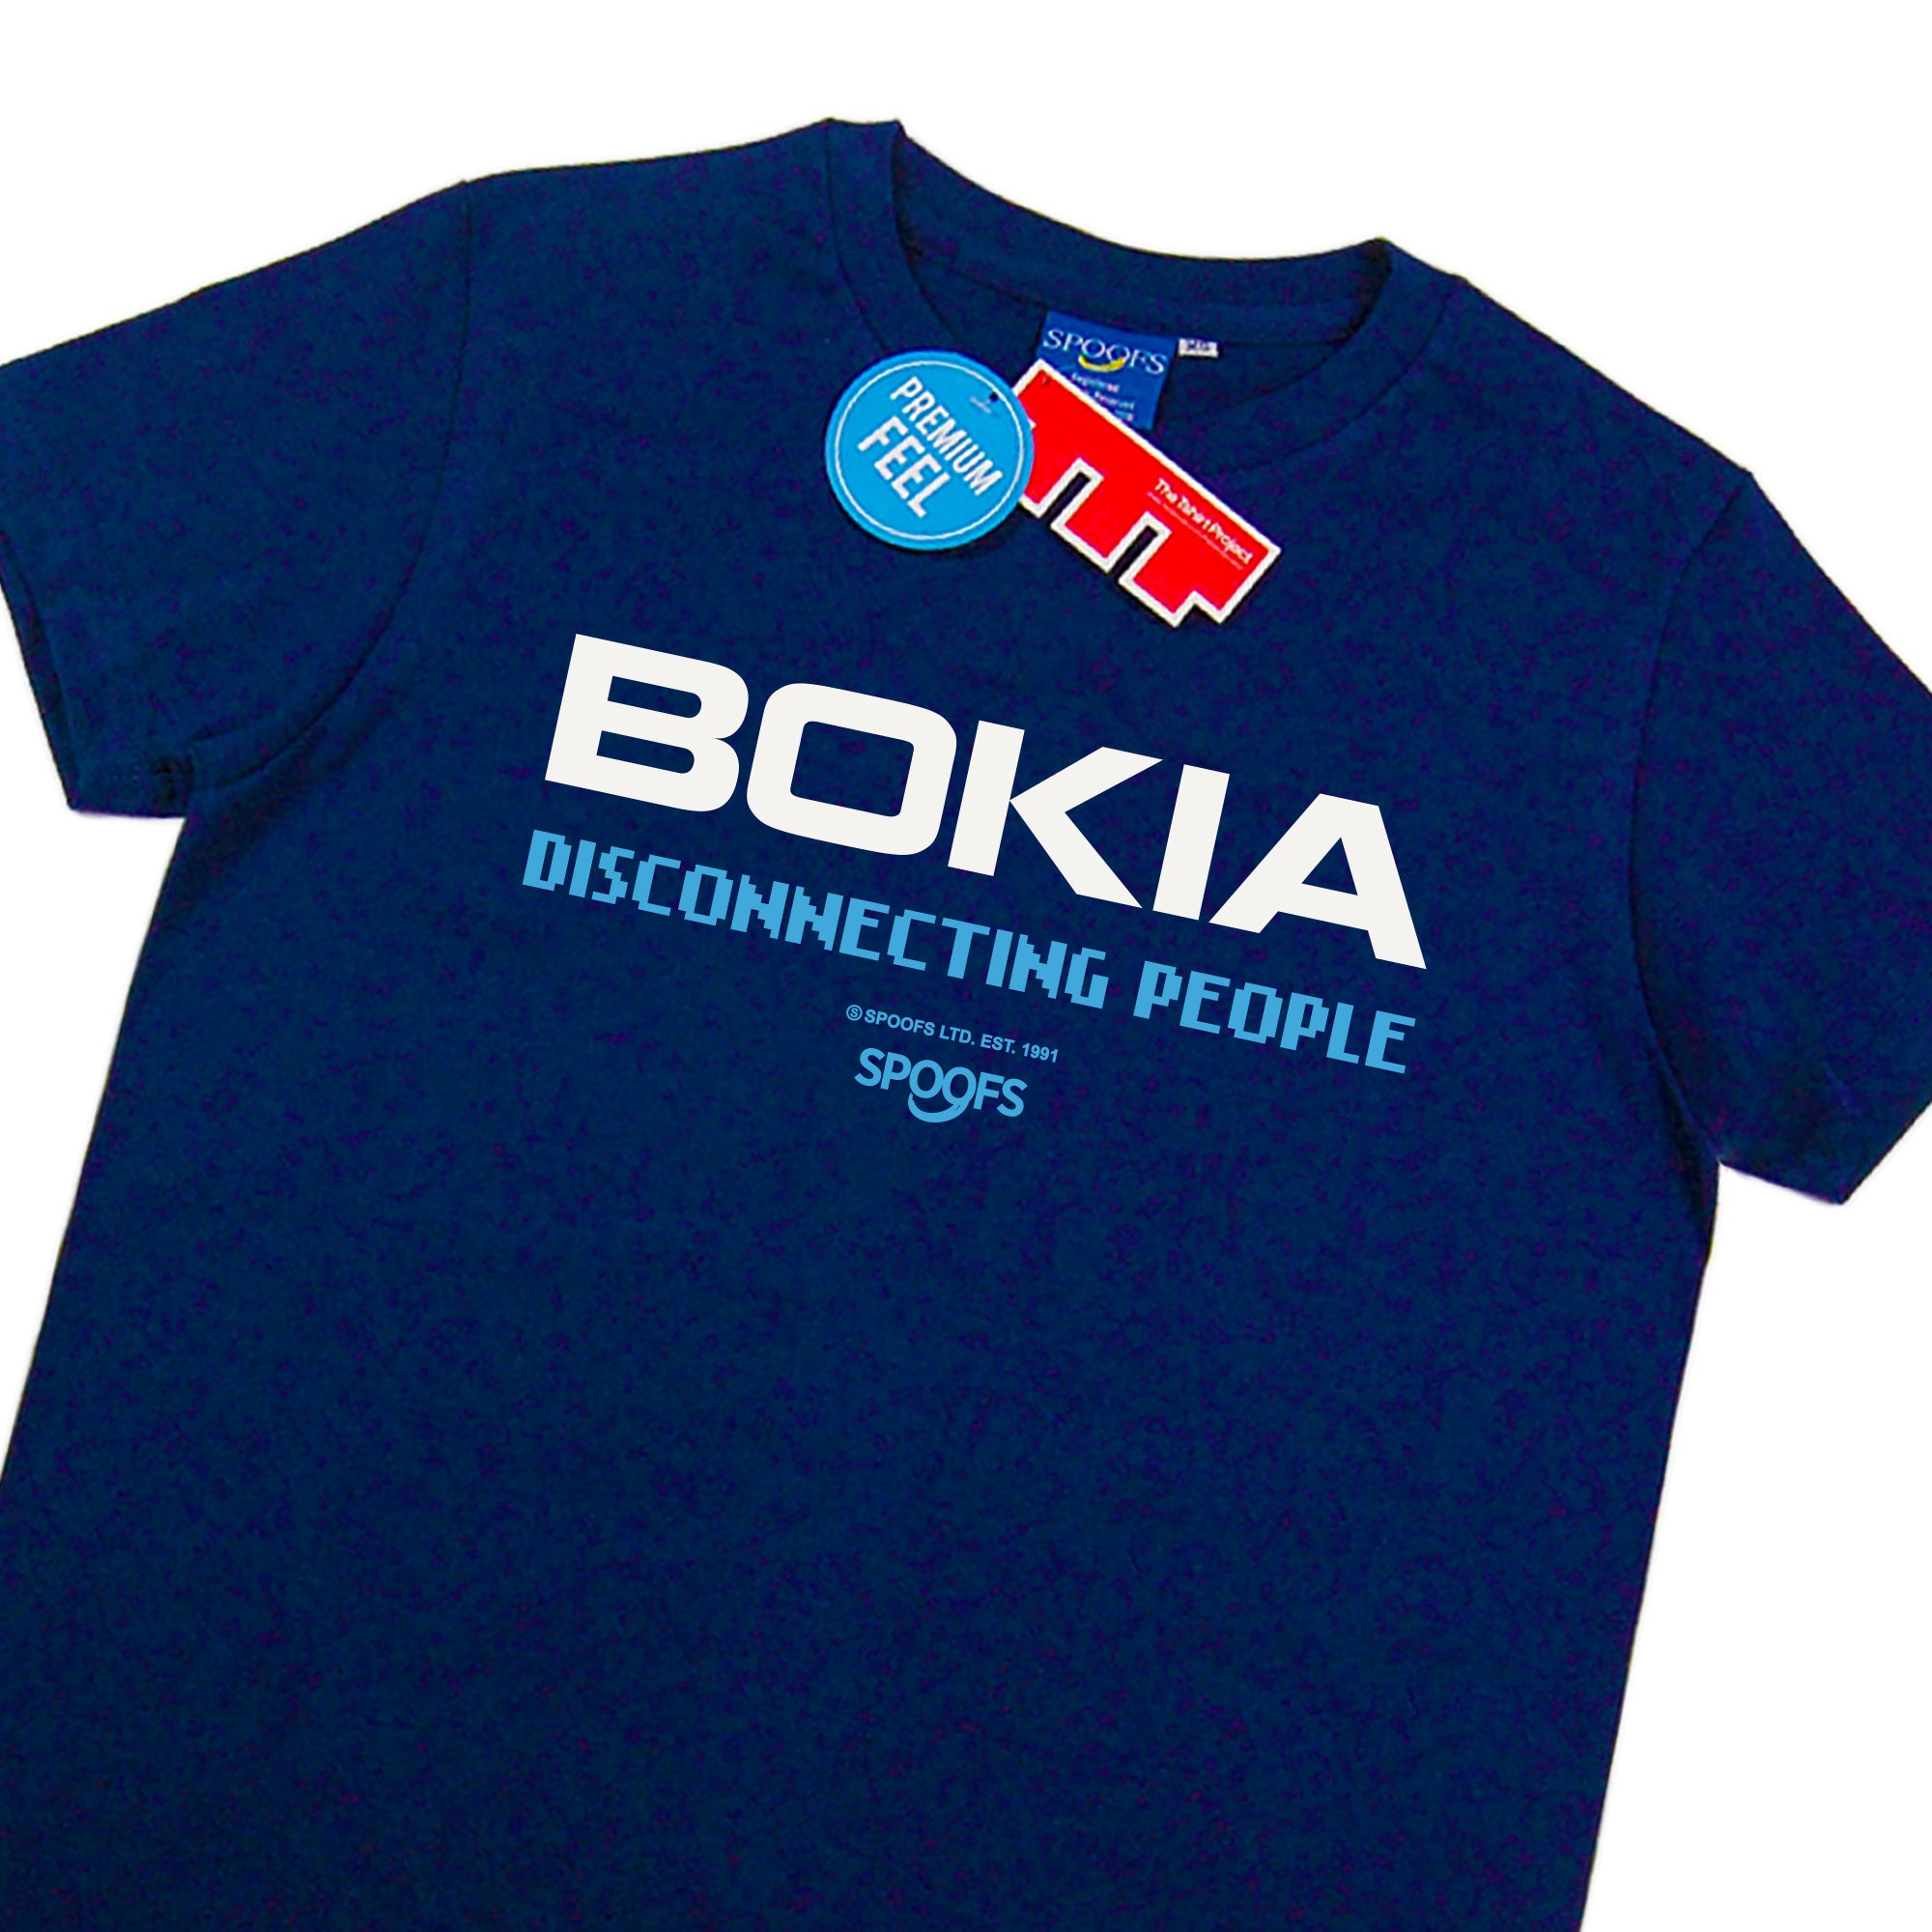 Re-issue Bokia (Navy Blue)